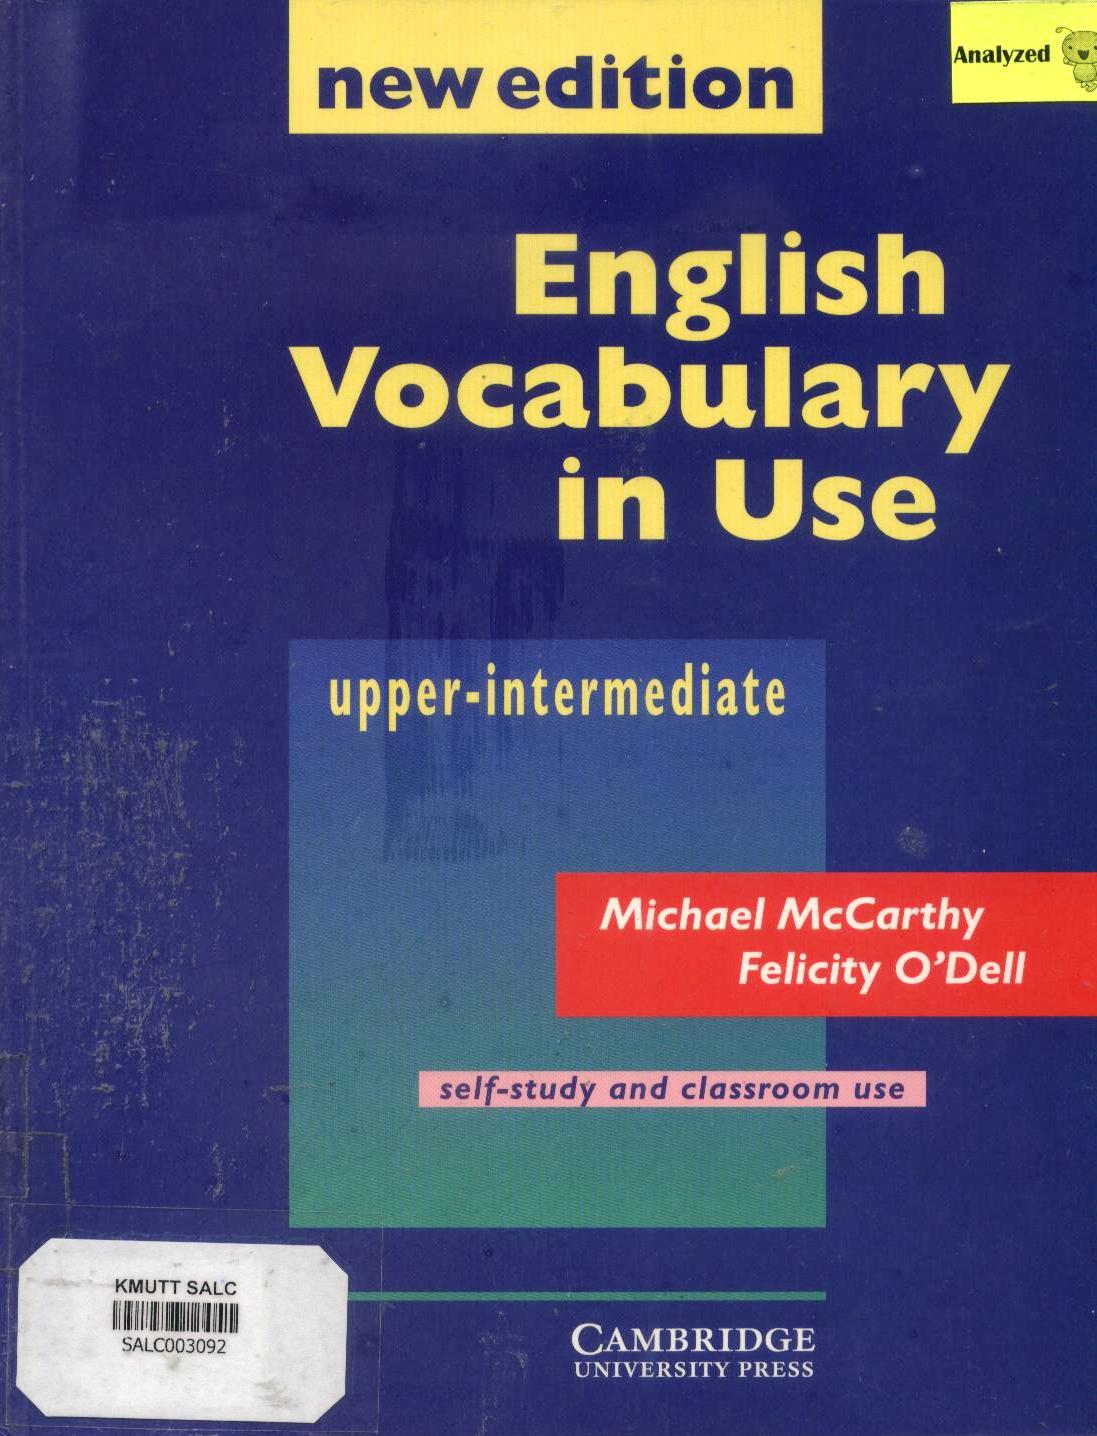 English Vocabulary in Use 2: New Edition